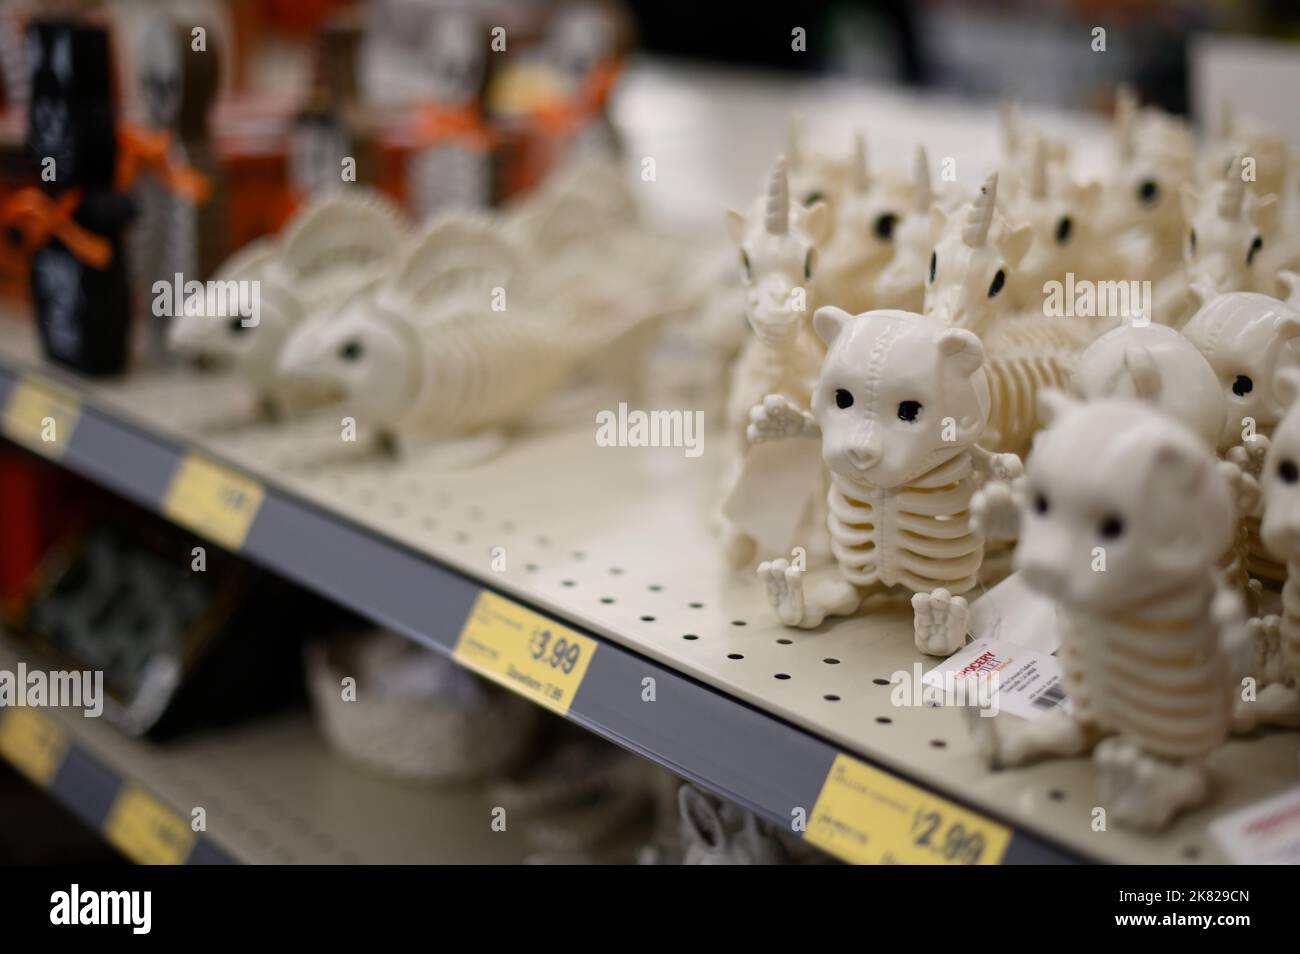 Philadelphia, United States. 19th Oct, 2022. Plastic halloween decorations for sale at a budget grocery store in Philadelphia, Pennsylvania, United States on October 19, 2022. The Federal Reserve closely monitors higher than usual inflation rates as consumers are affected by continued increase of costs. Credit: OOgImages/Alamy Live News Stock Photo